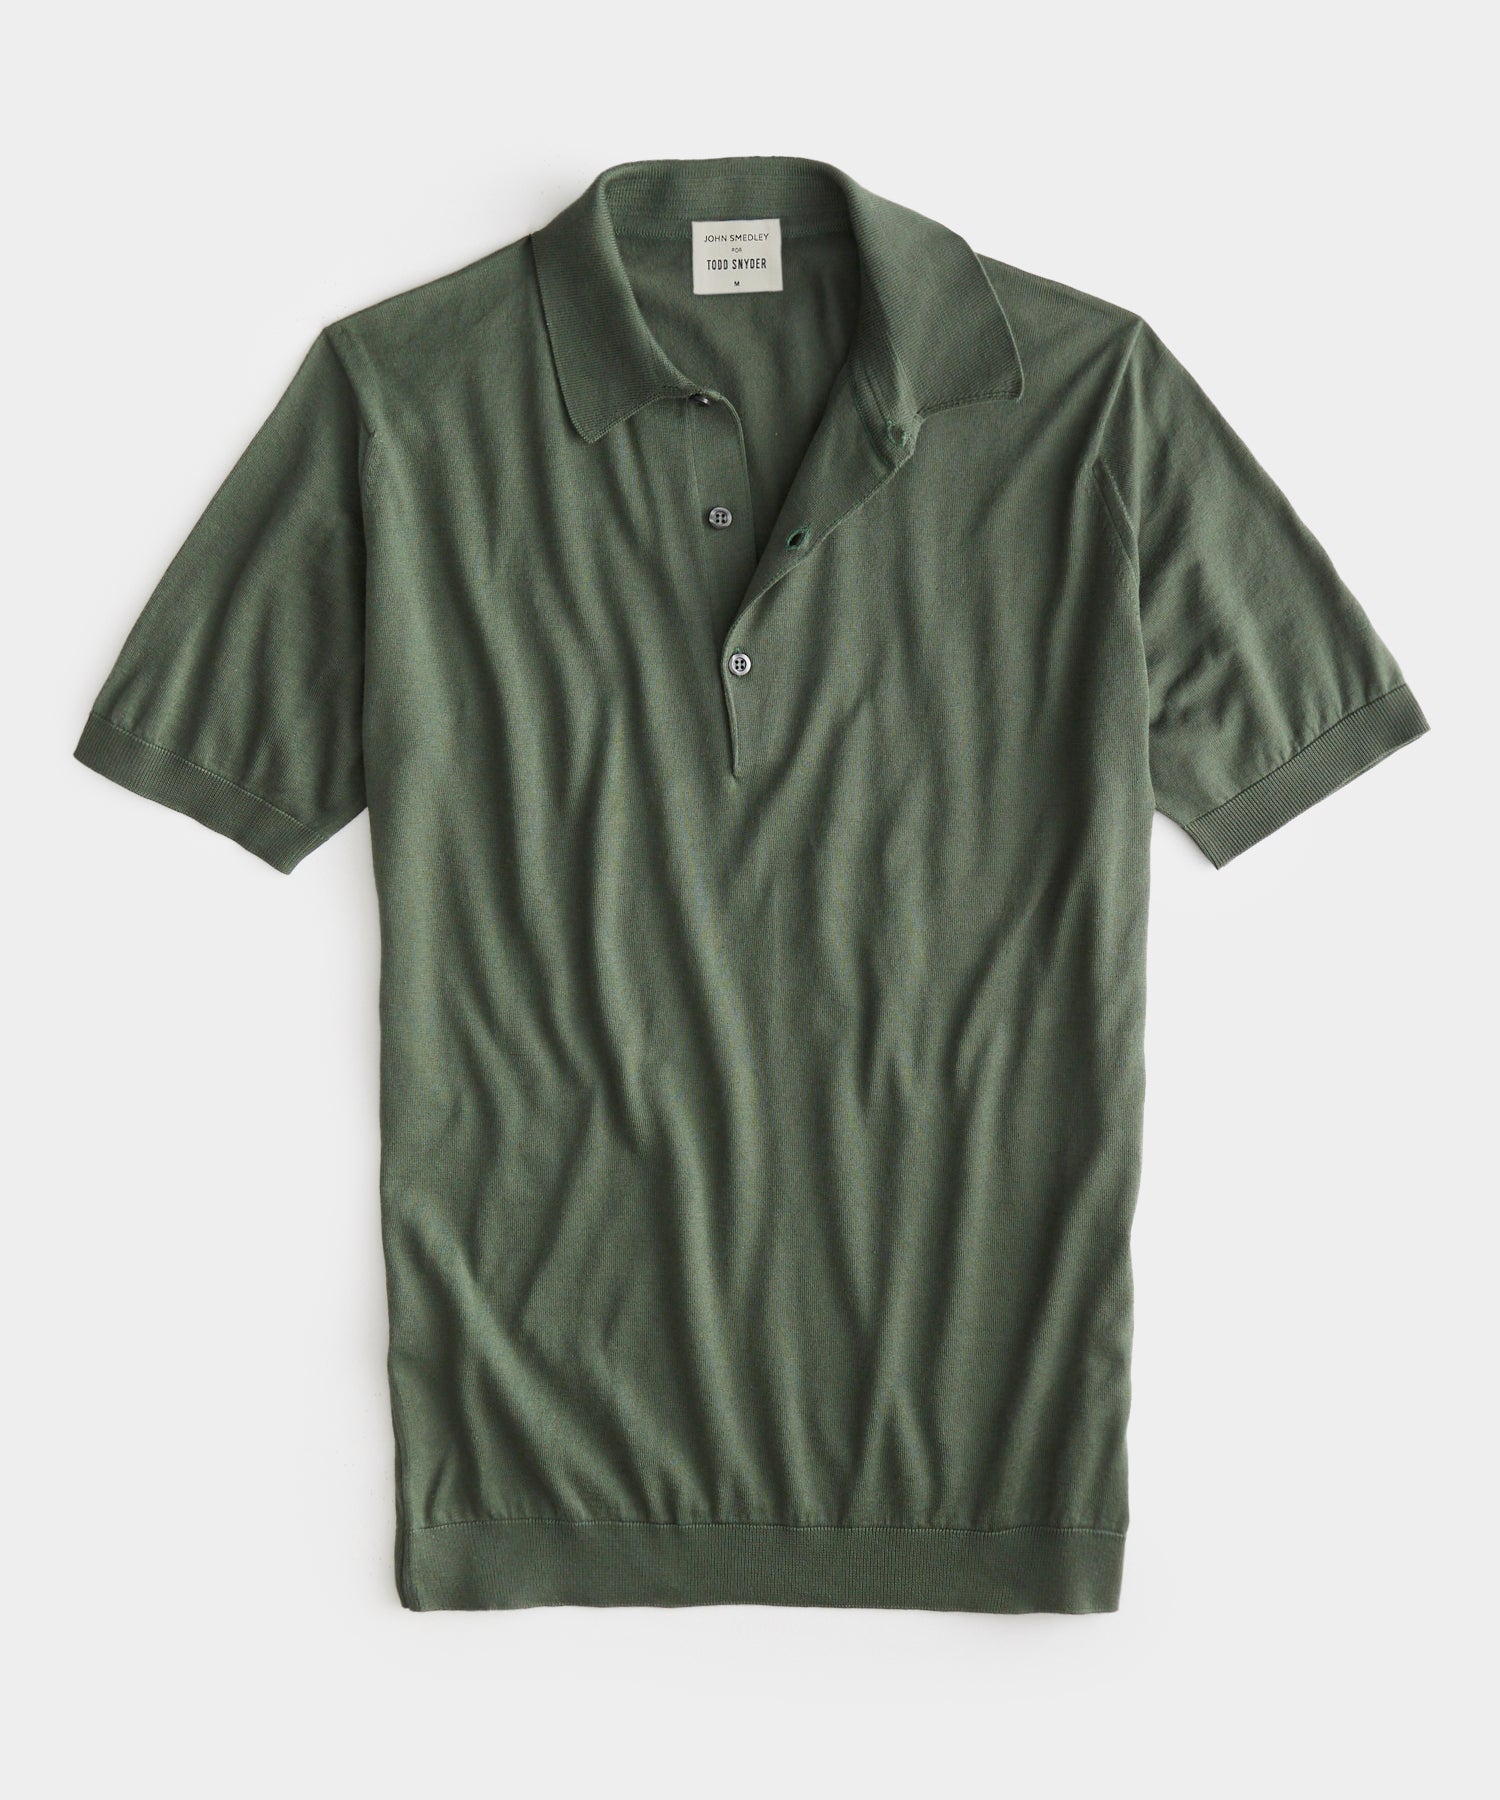 John Smedley x Todd Snyder Adrian Polo in Palm S / Olive / ADRIAN-301